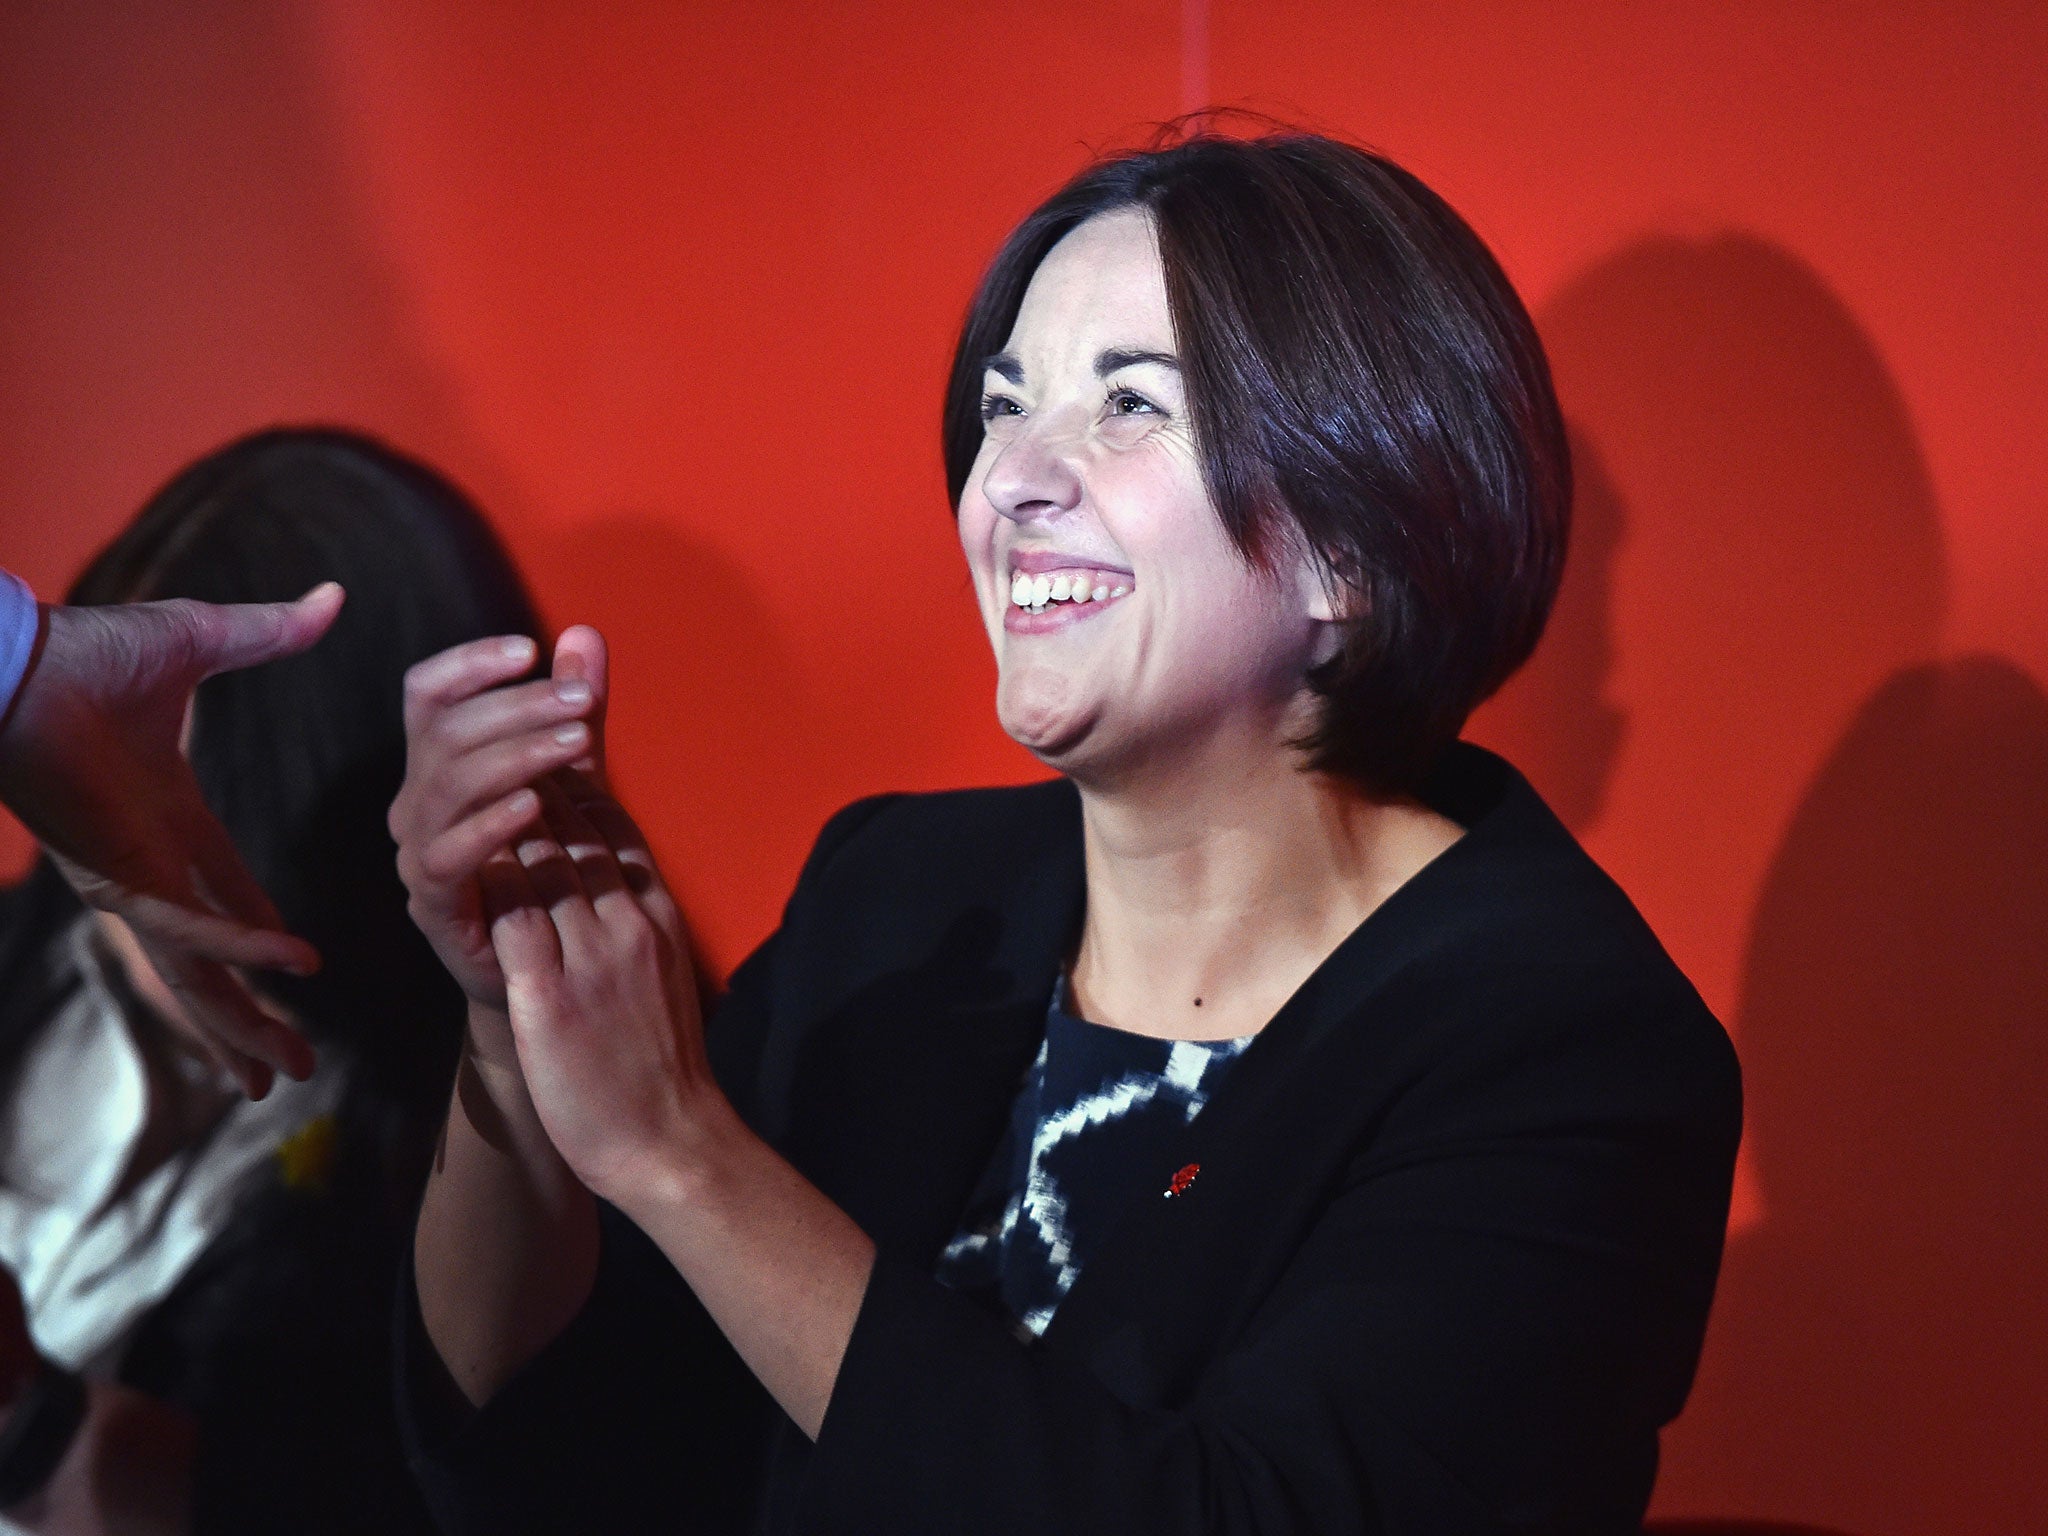 The Scottish Labour leader, Kezia Dugdale, is in a relationship with a woman